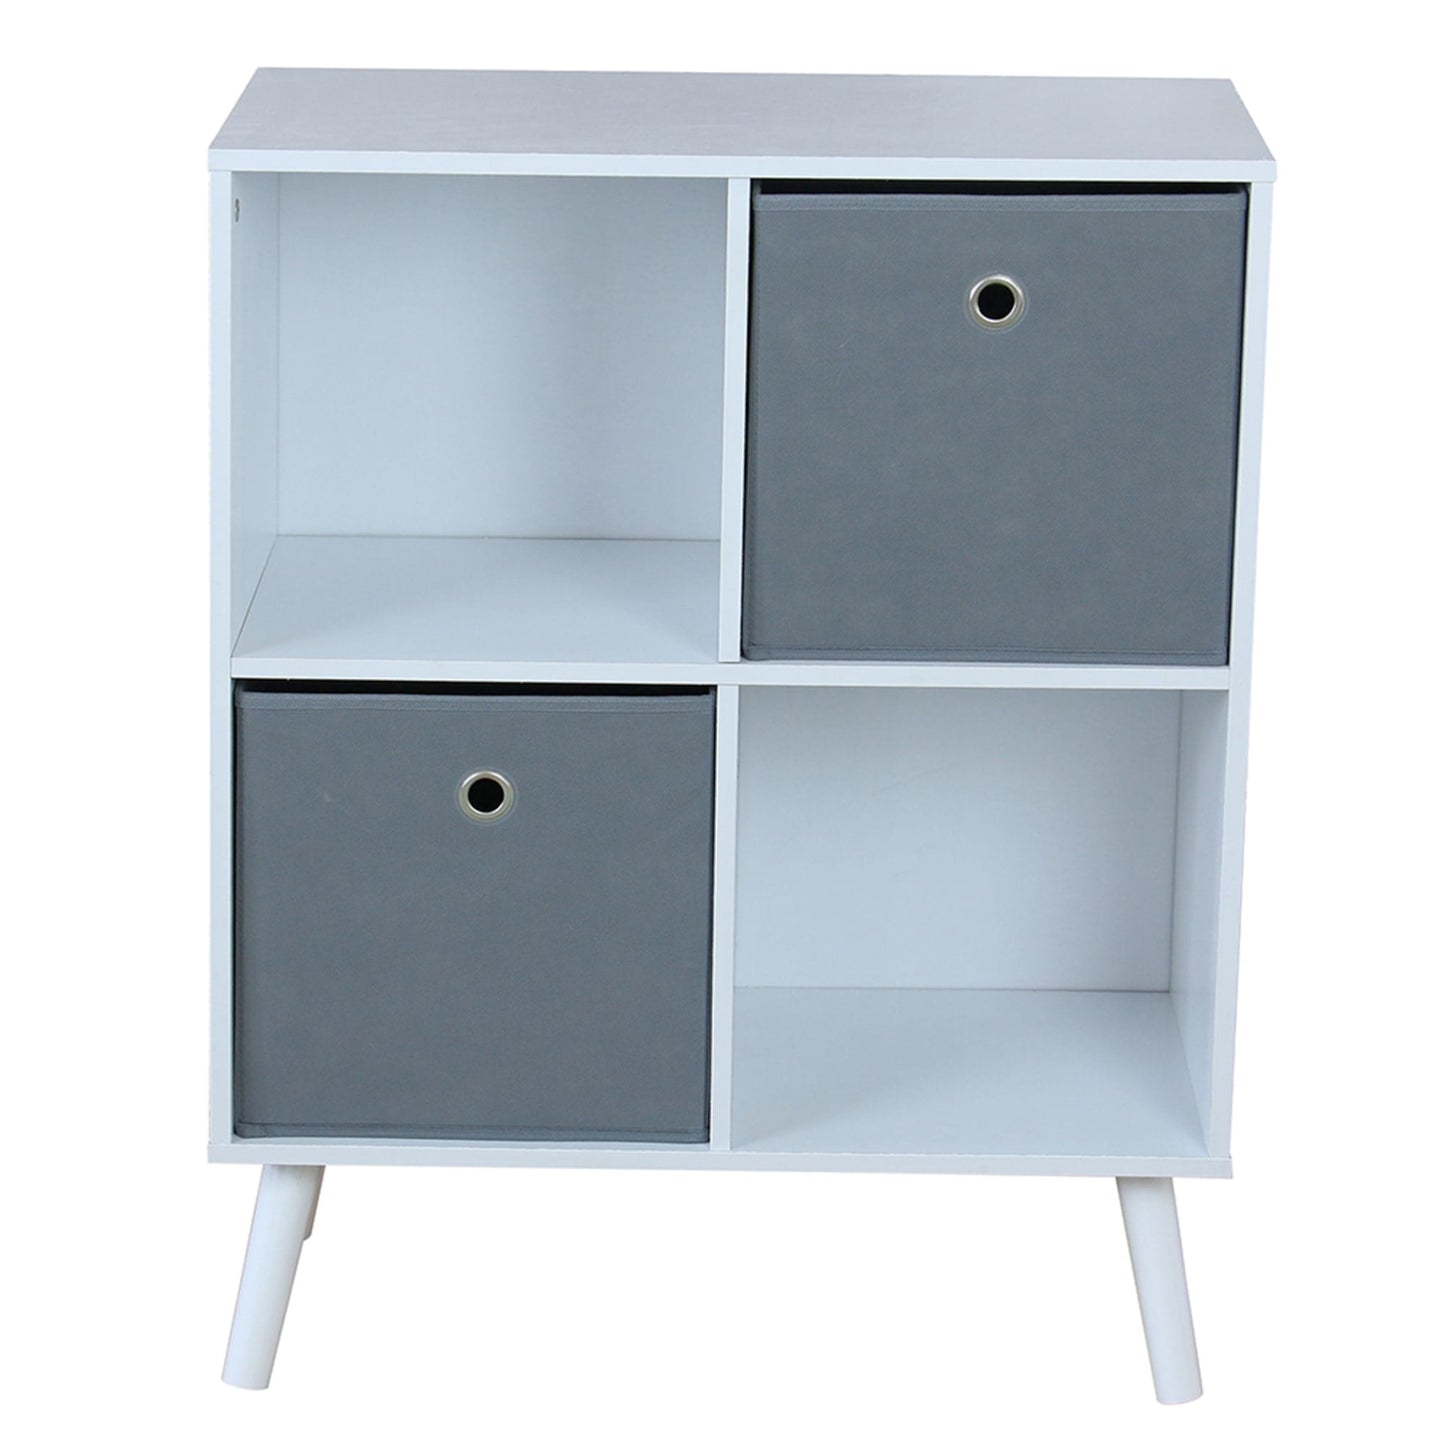 4 Cube Organizer with Two Bins, White